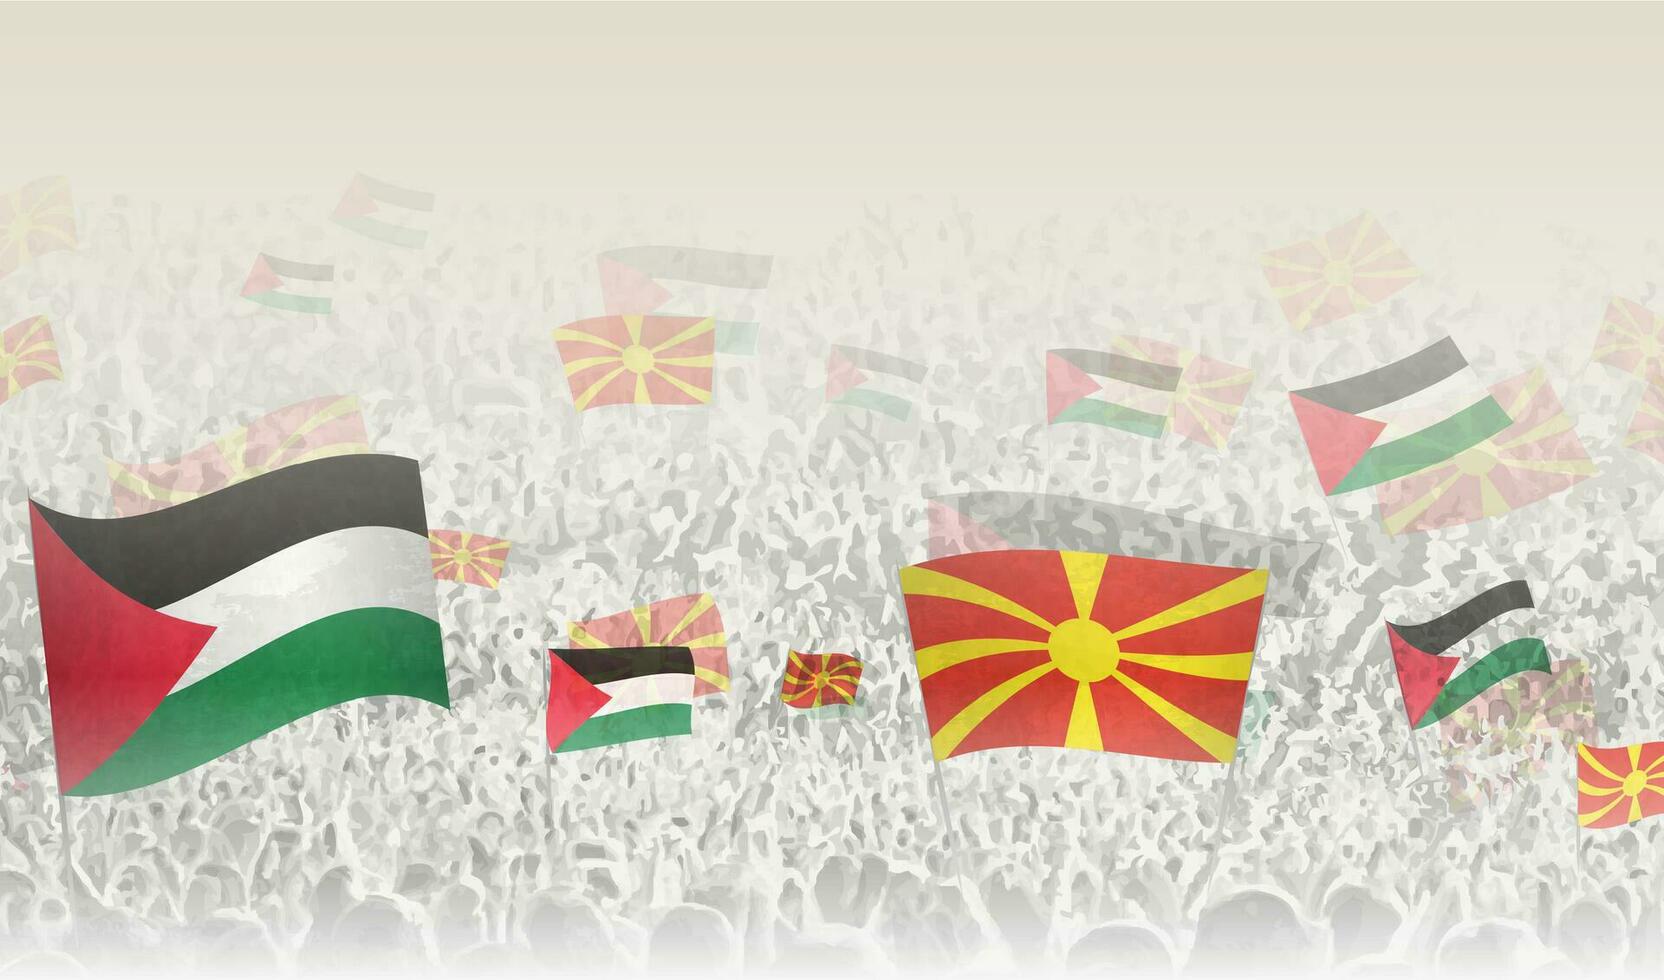 Palestine and North Macedonia flags in a crowd of cheering people. vector